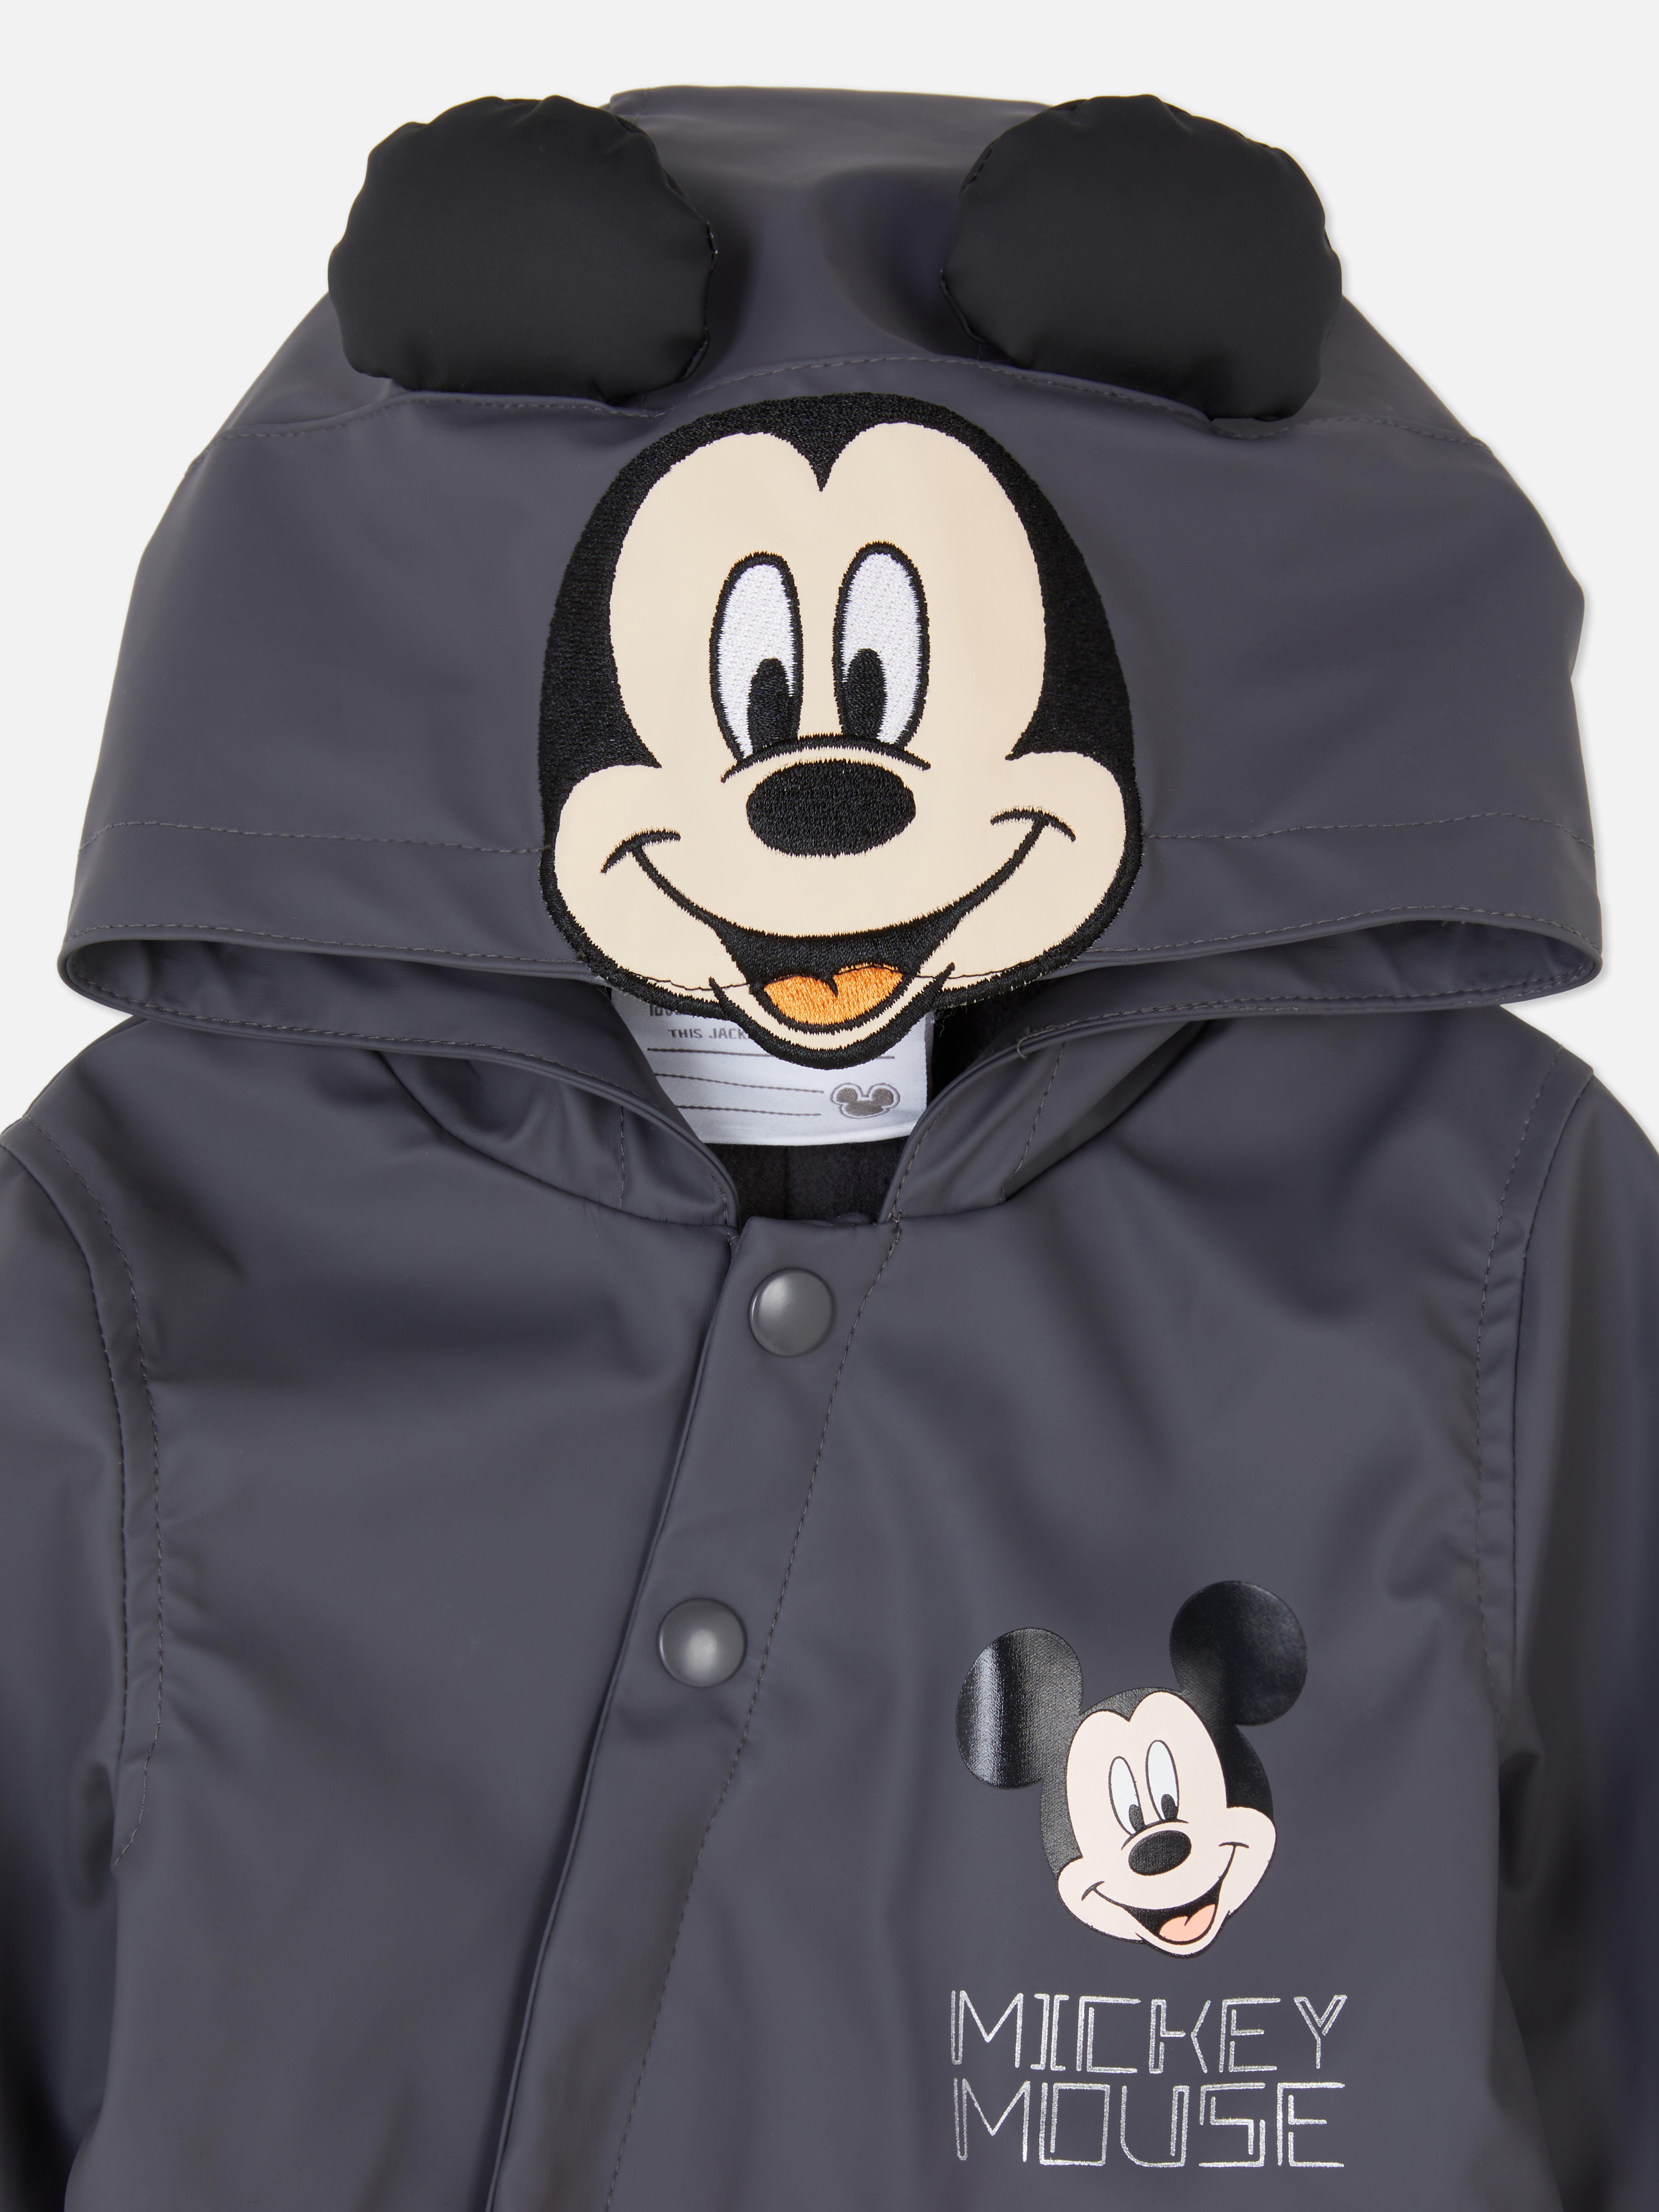 Disney’s Mickey Mouse Puddle Suit